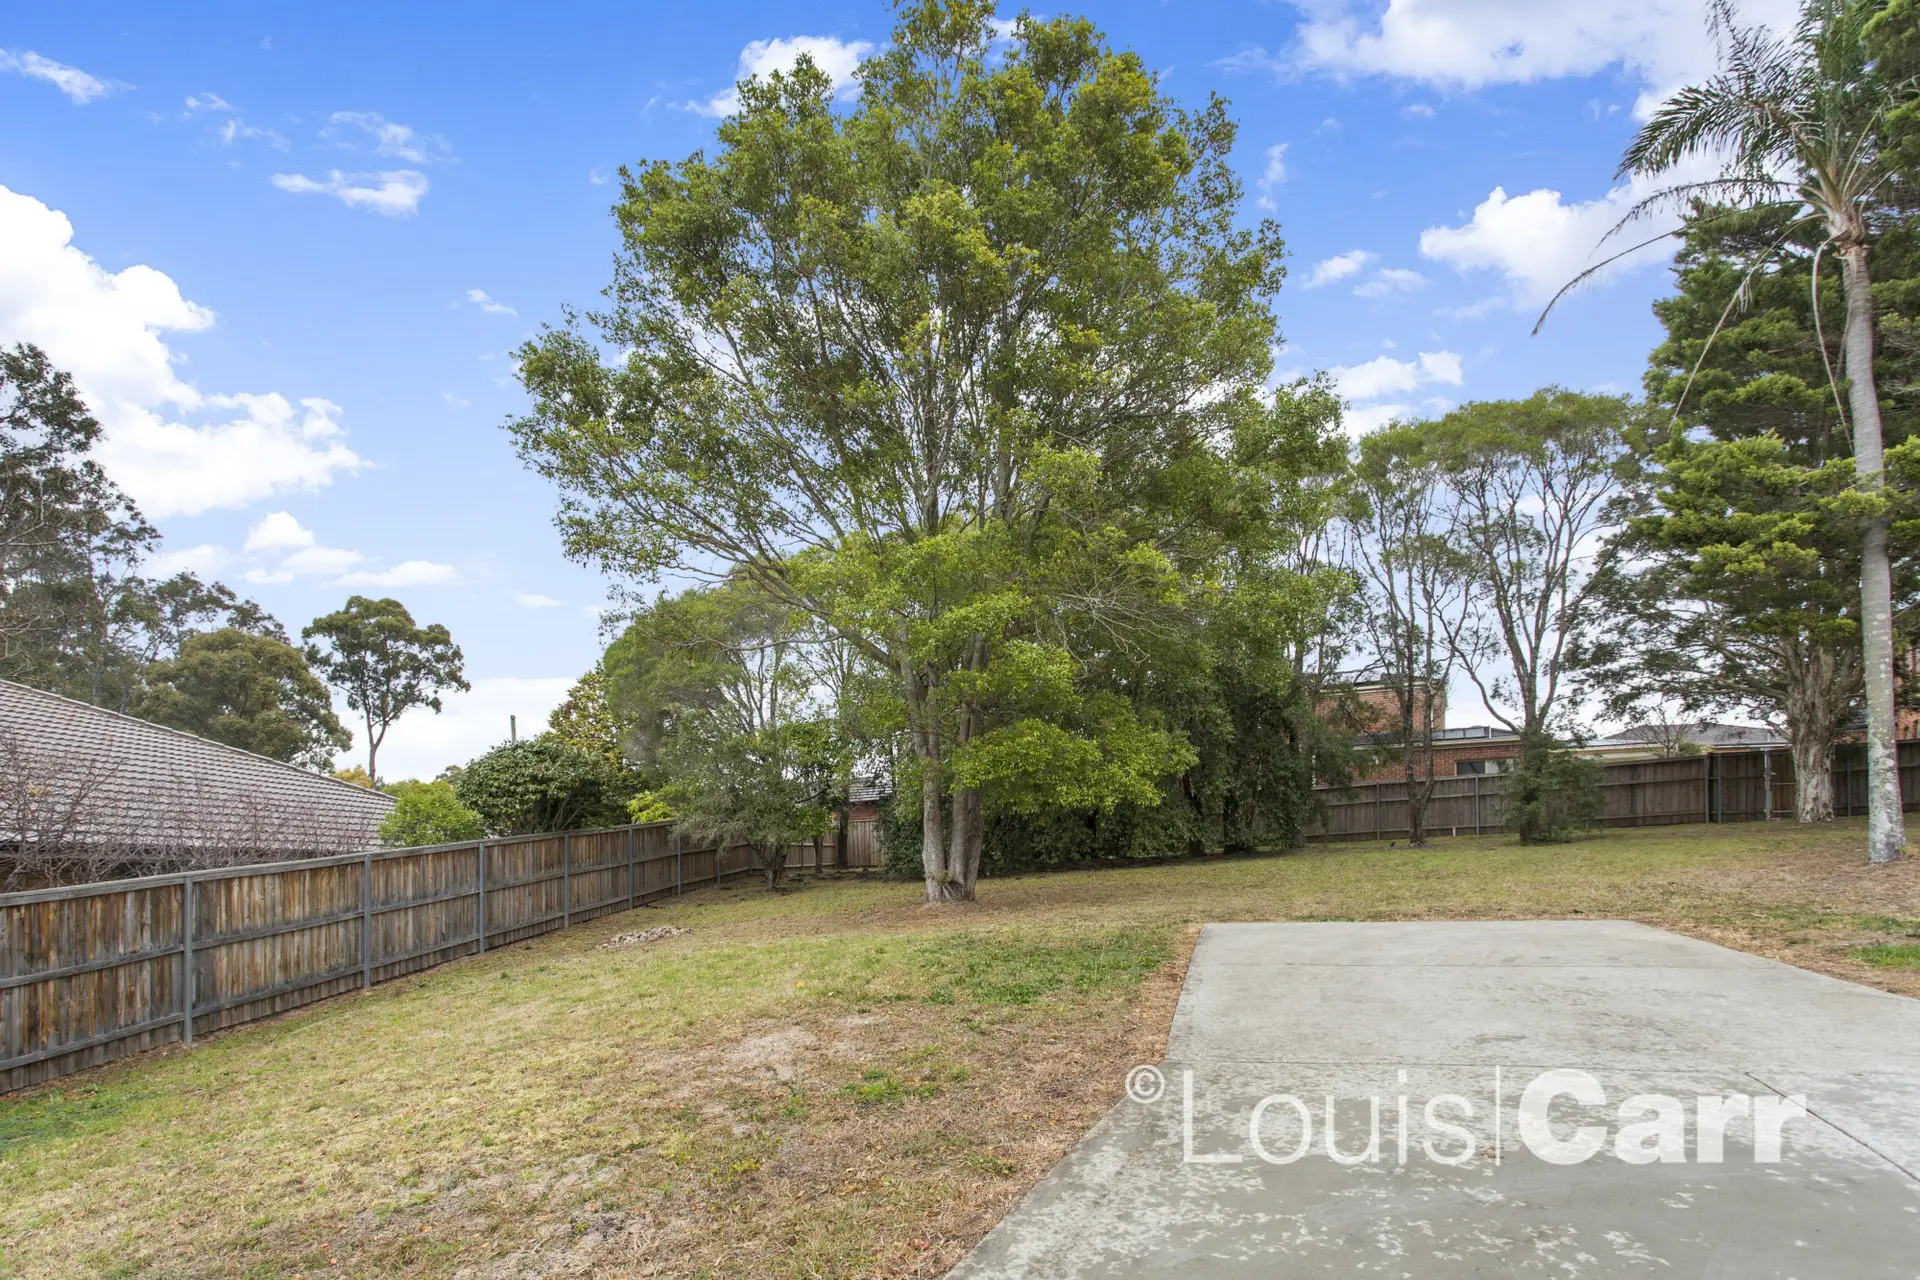 Photo #10: 3A Cherrybrook Road, West Pennant Hills - Sold by Louis Carr Real Estate